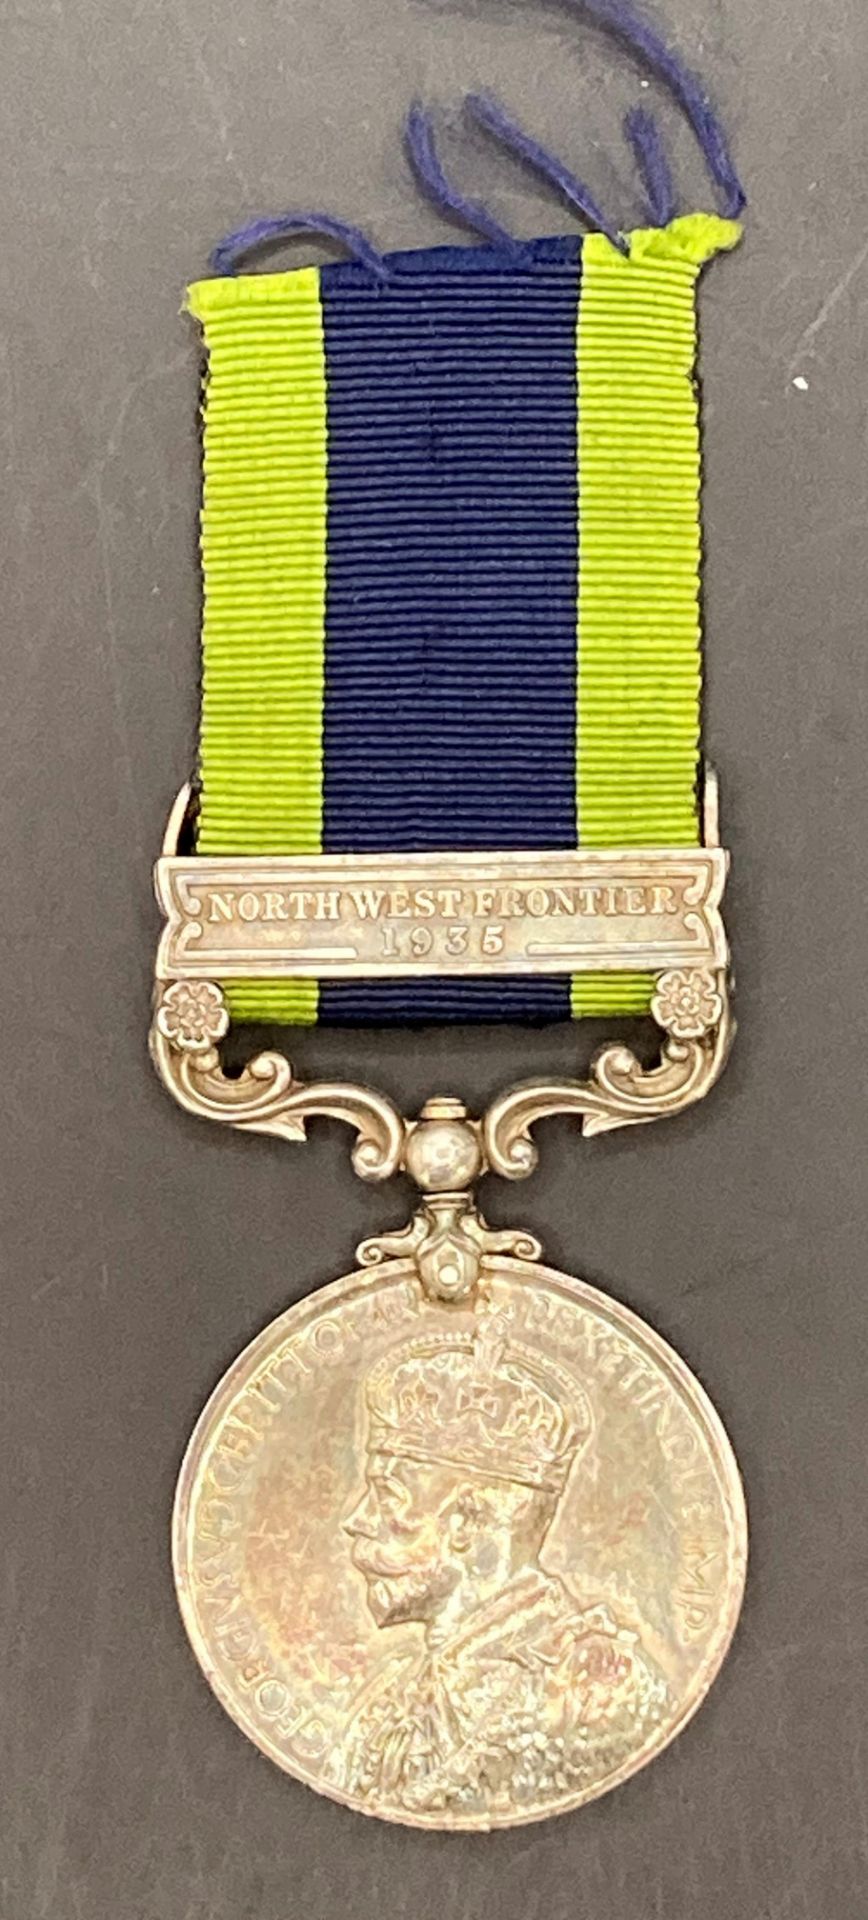 India General Service Medal 1908-1935 with clasp North West Frontier 1935 and ribbon to 2979269 Pte